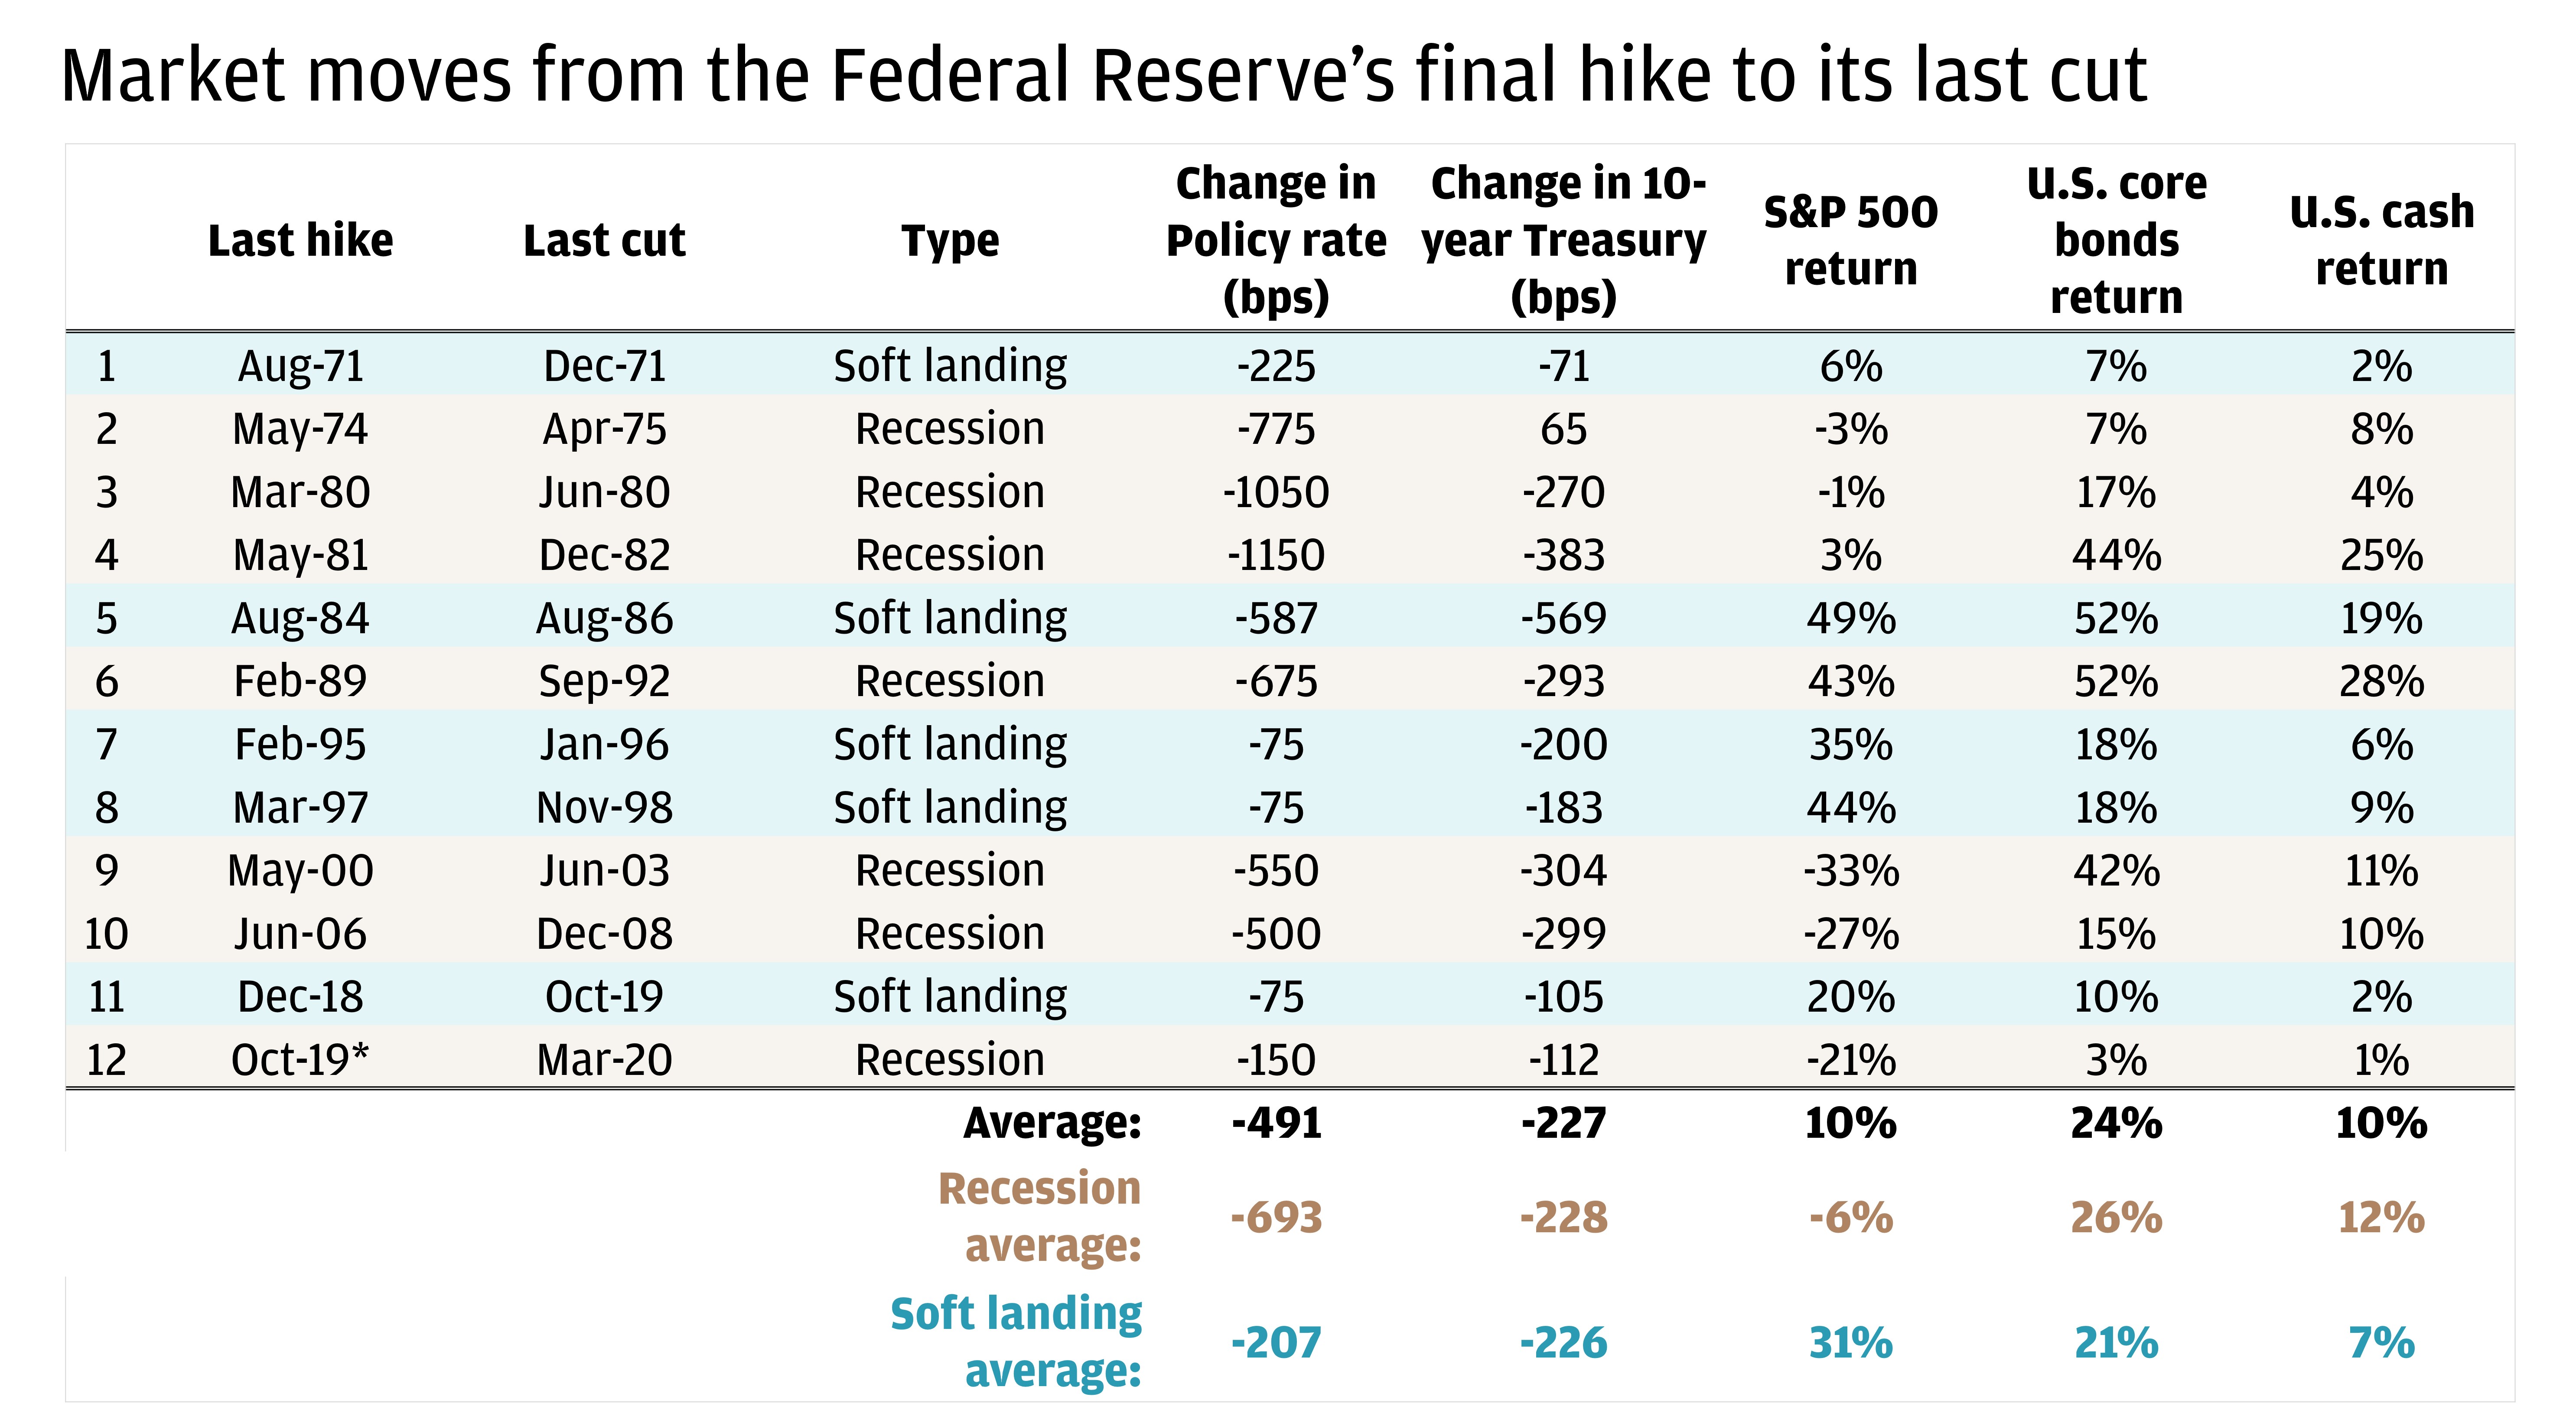 This table shows the market moves from the Federal Reserve’s final hike to its last cut since 1970. 